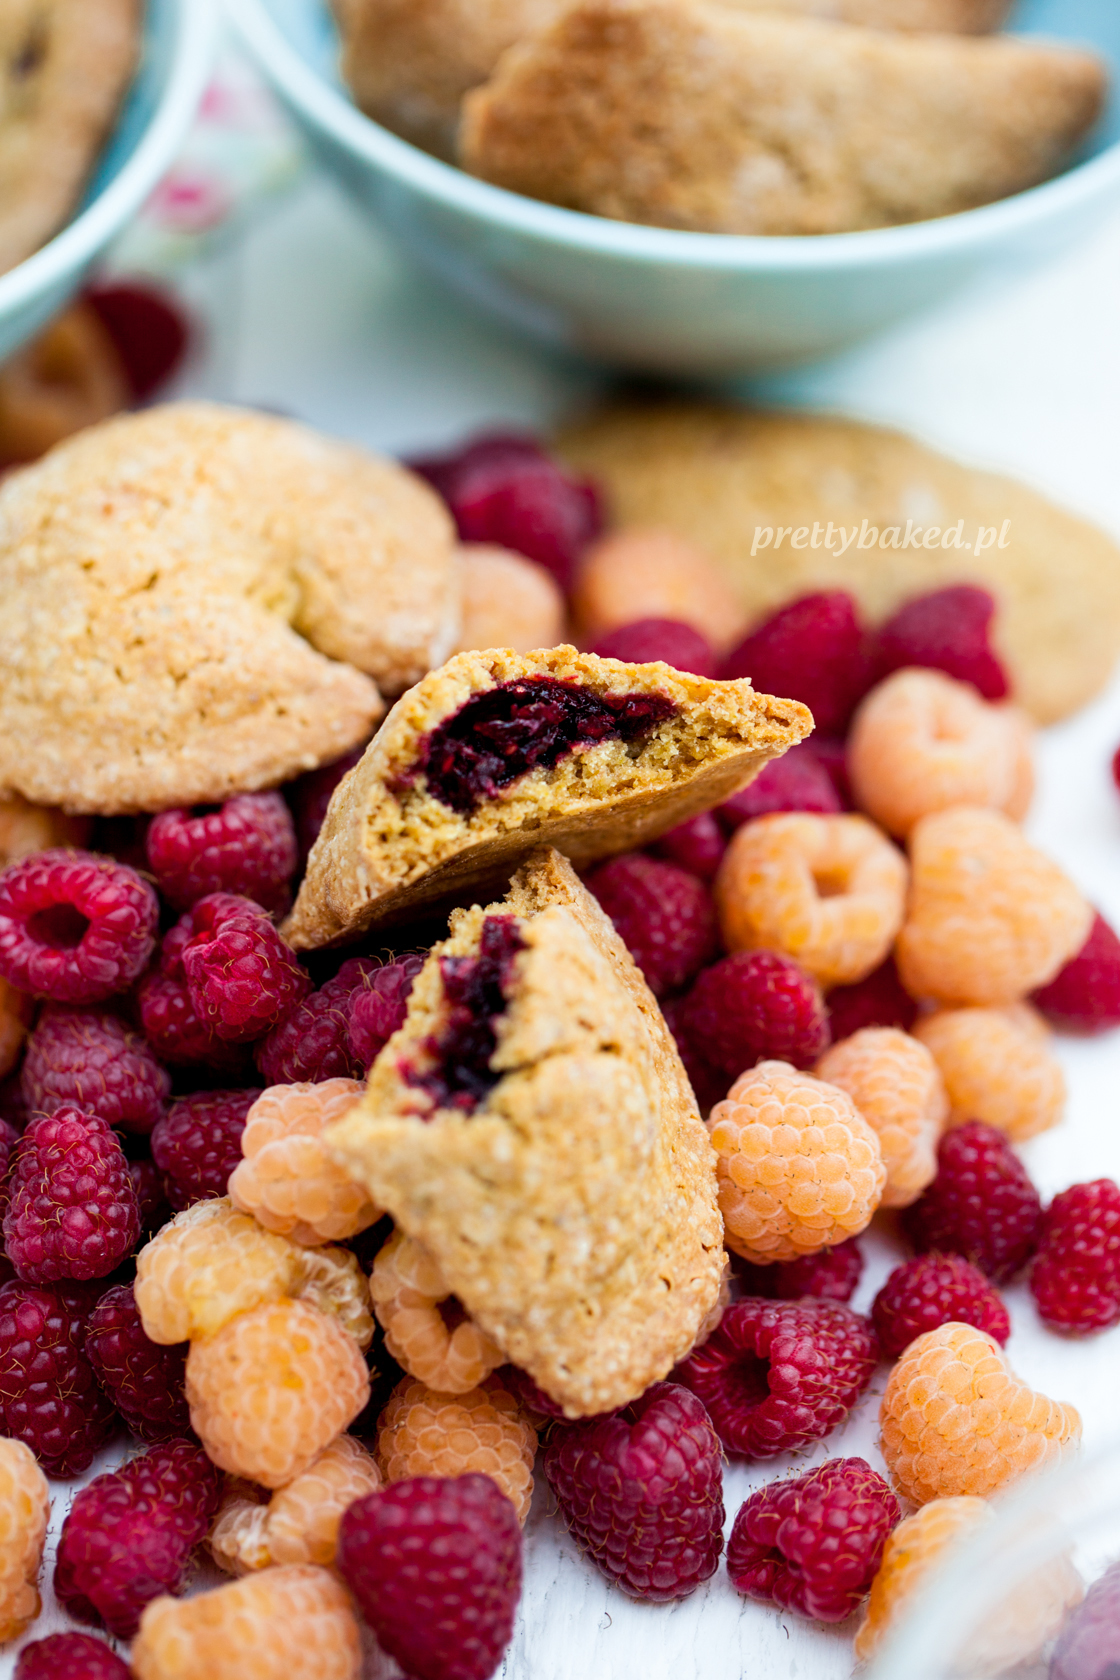 prettybaked sweet dessert pistachio raspberry Fruit yummy Food  foodie styling  baking jam rosewater nuts cookie